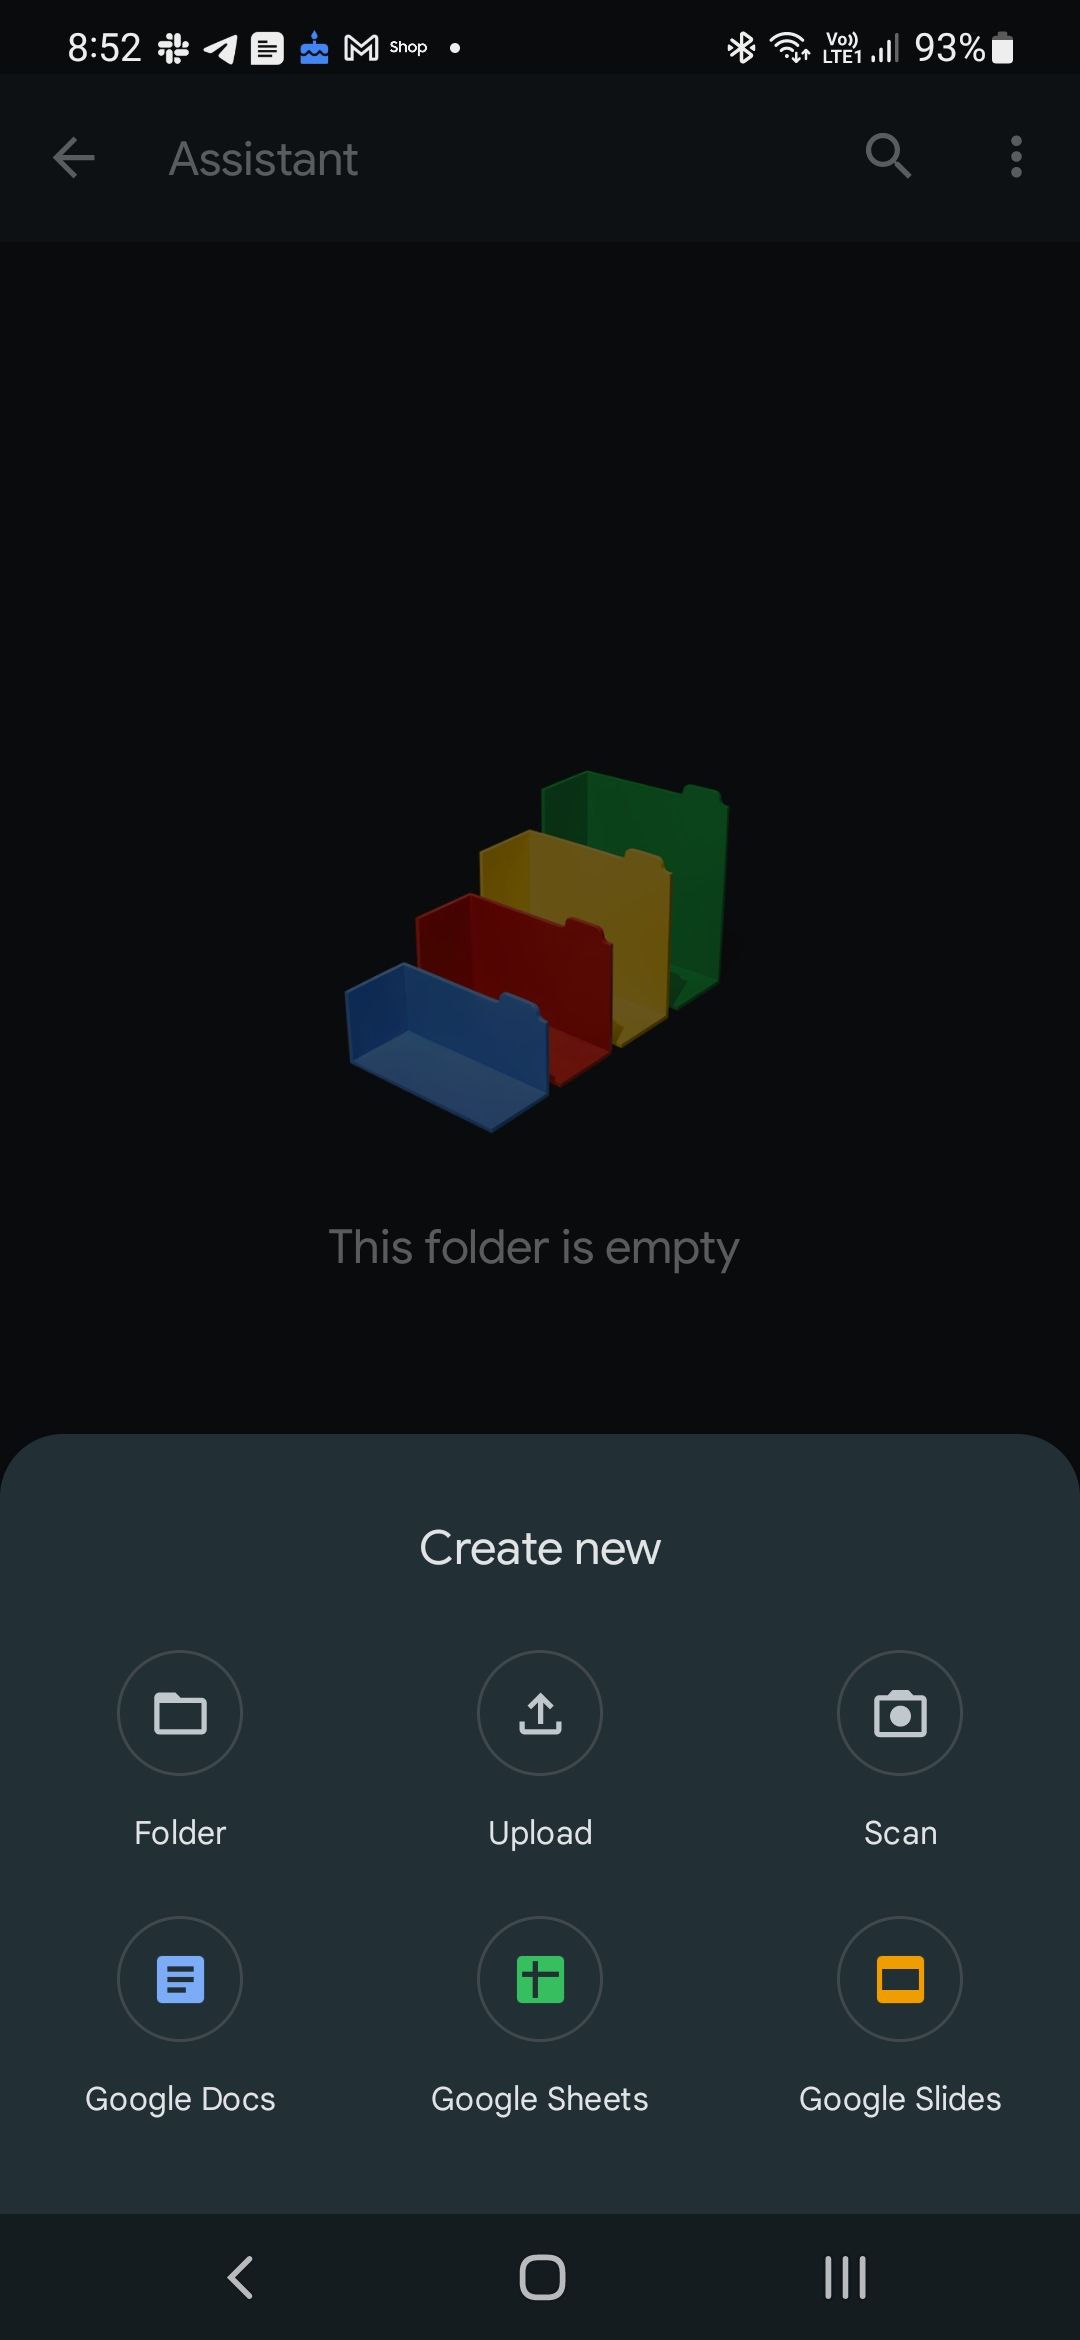 Mobile screenshot of Google Drive's 'Create new' menu with options to create a new folder, file upload, document scan, Google Docs, Google Sheets, and Google Slides.